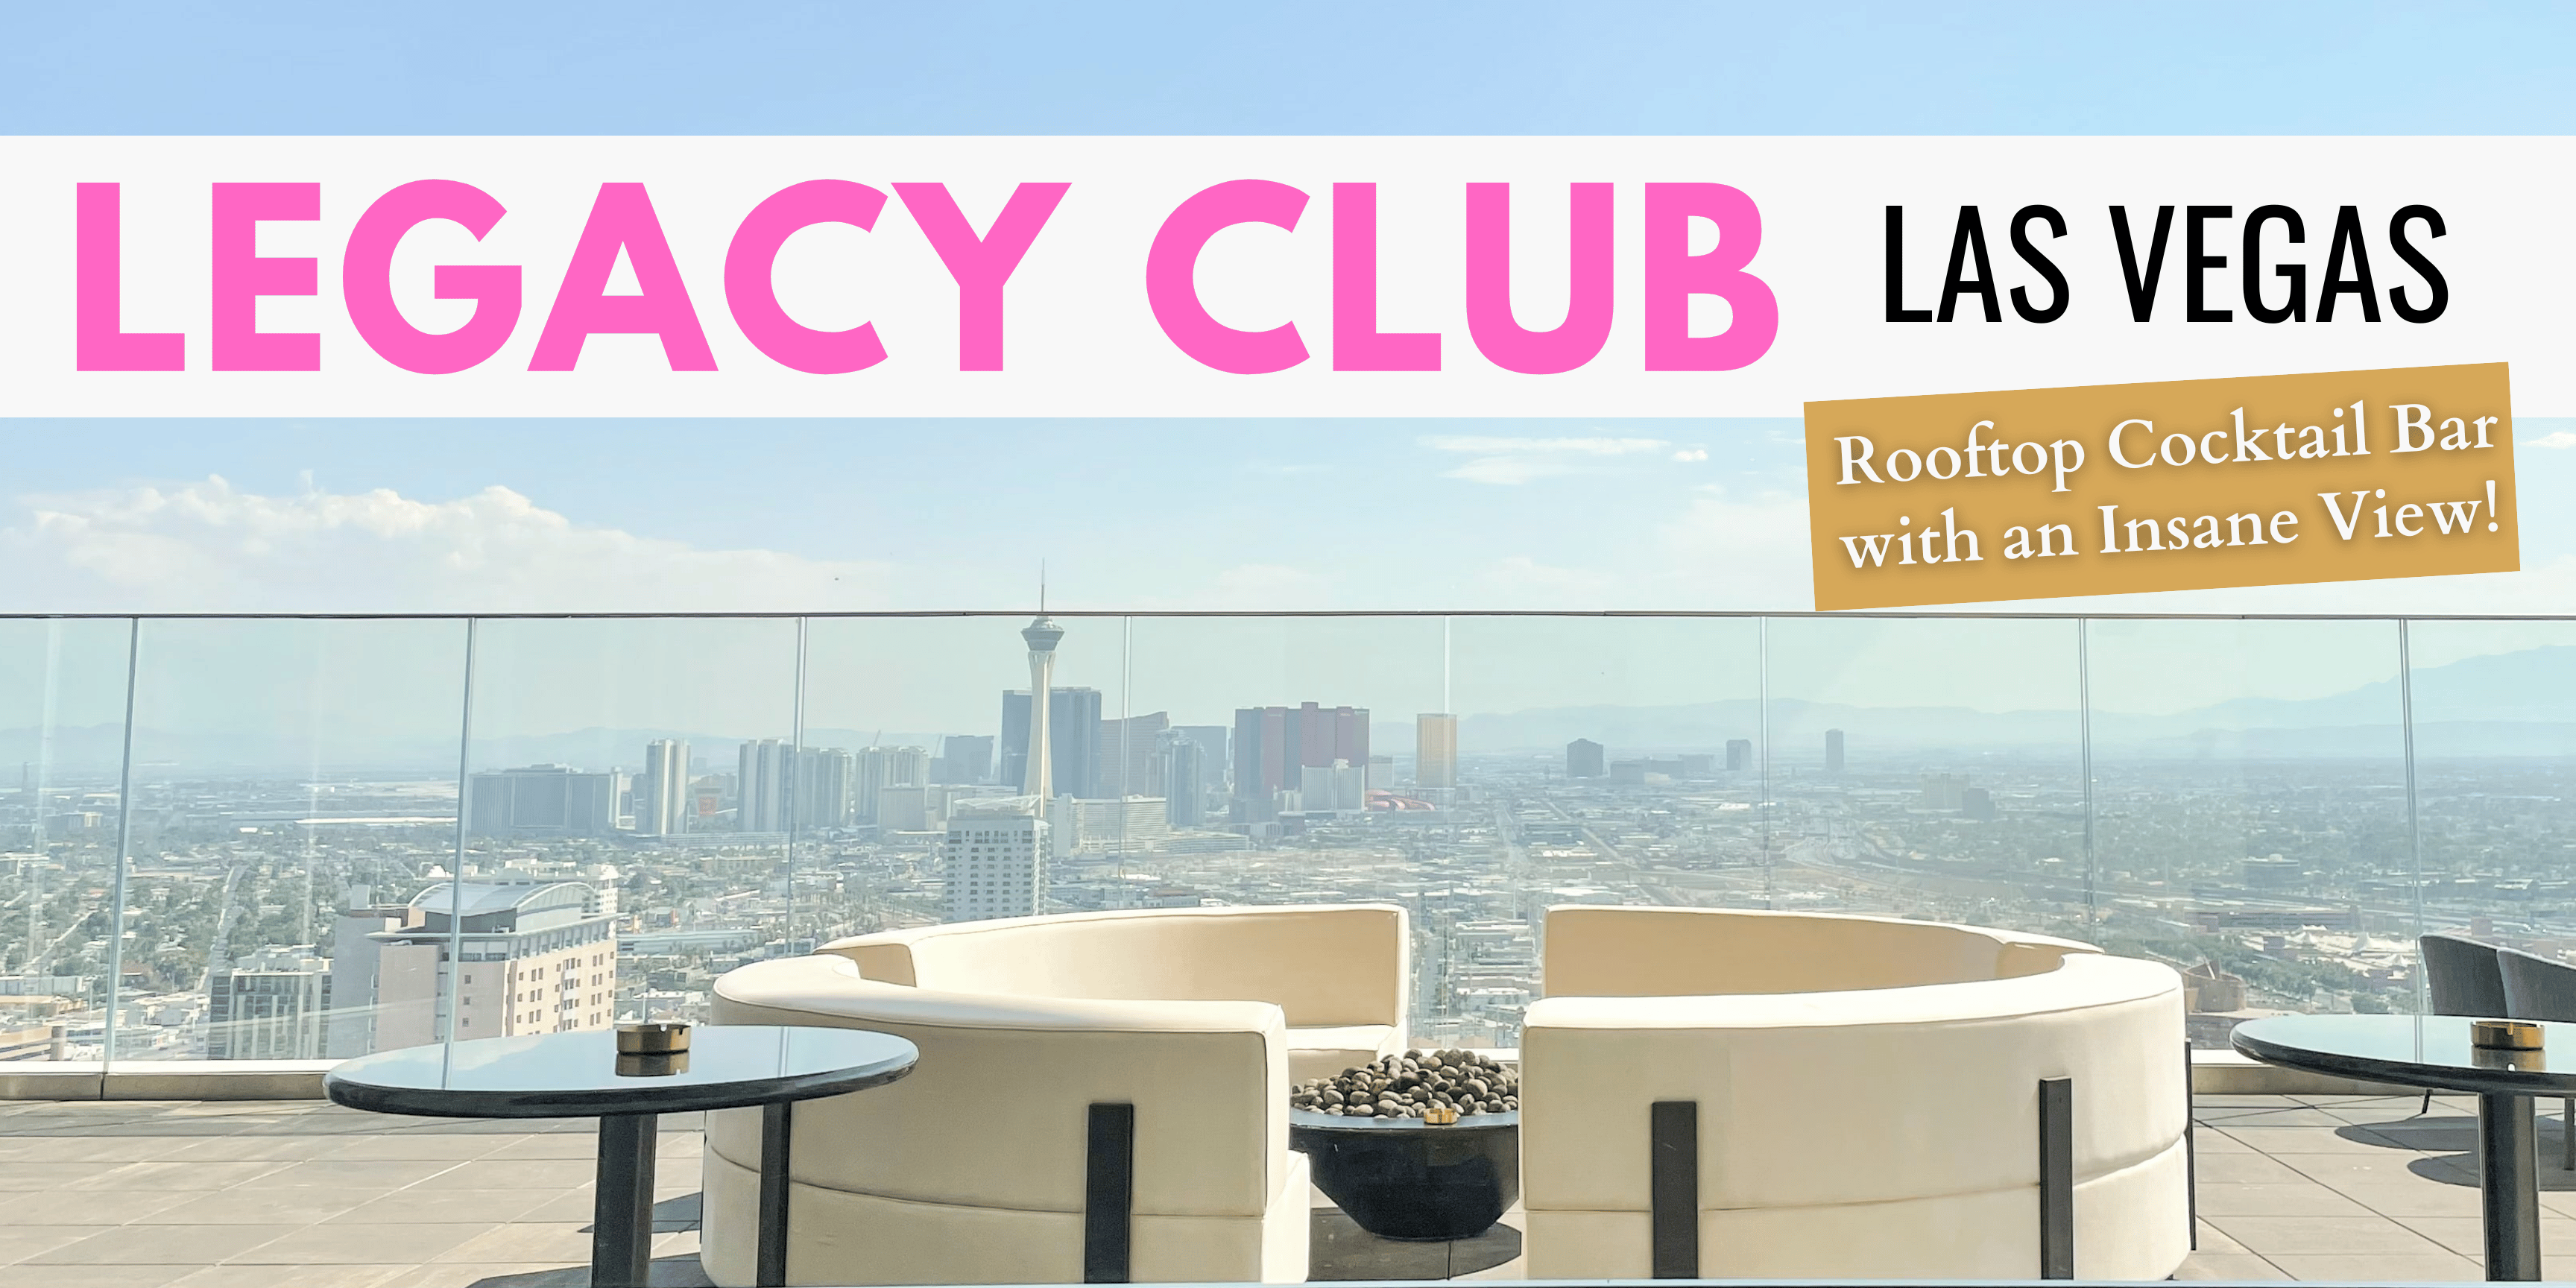 Legacy Club Las Vegas Rooftop Cocktail Bar with an Insane View!